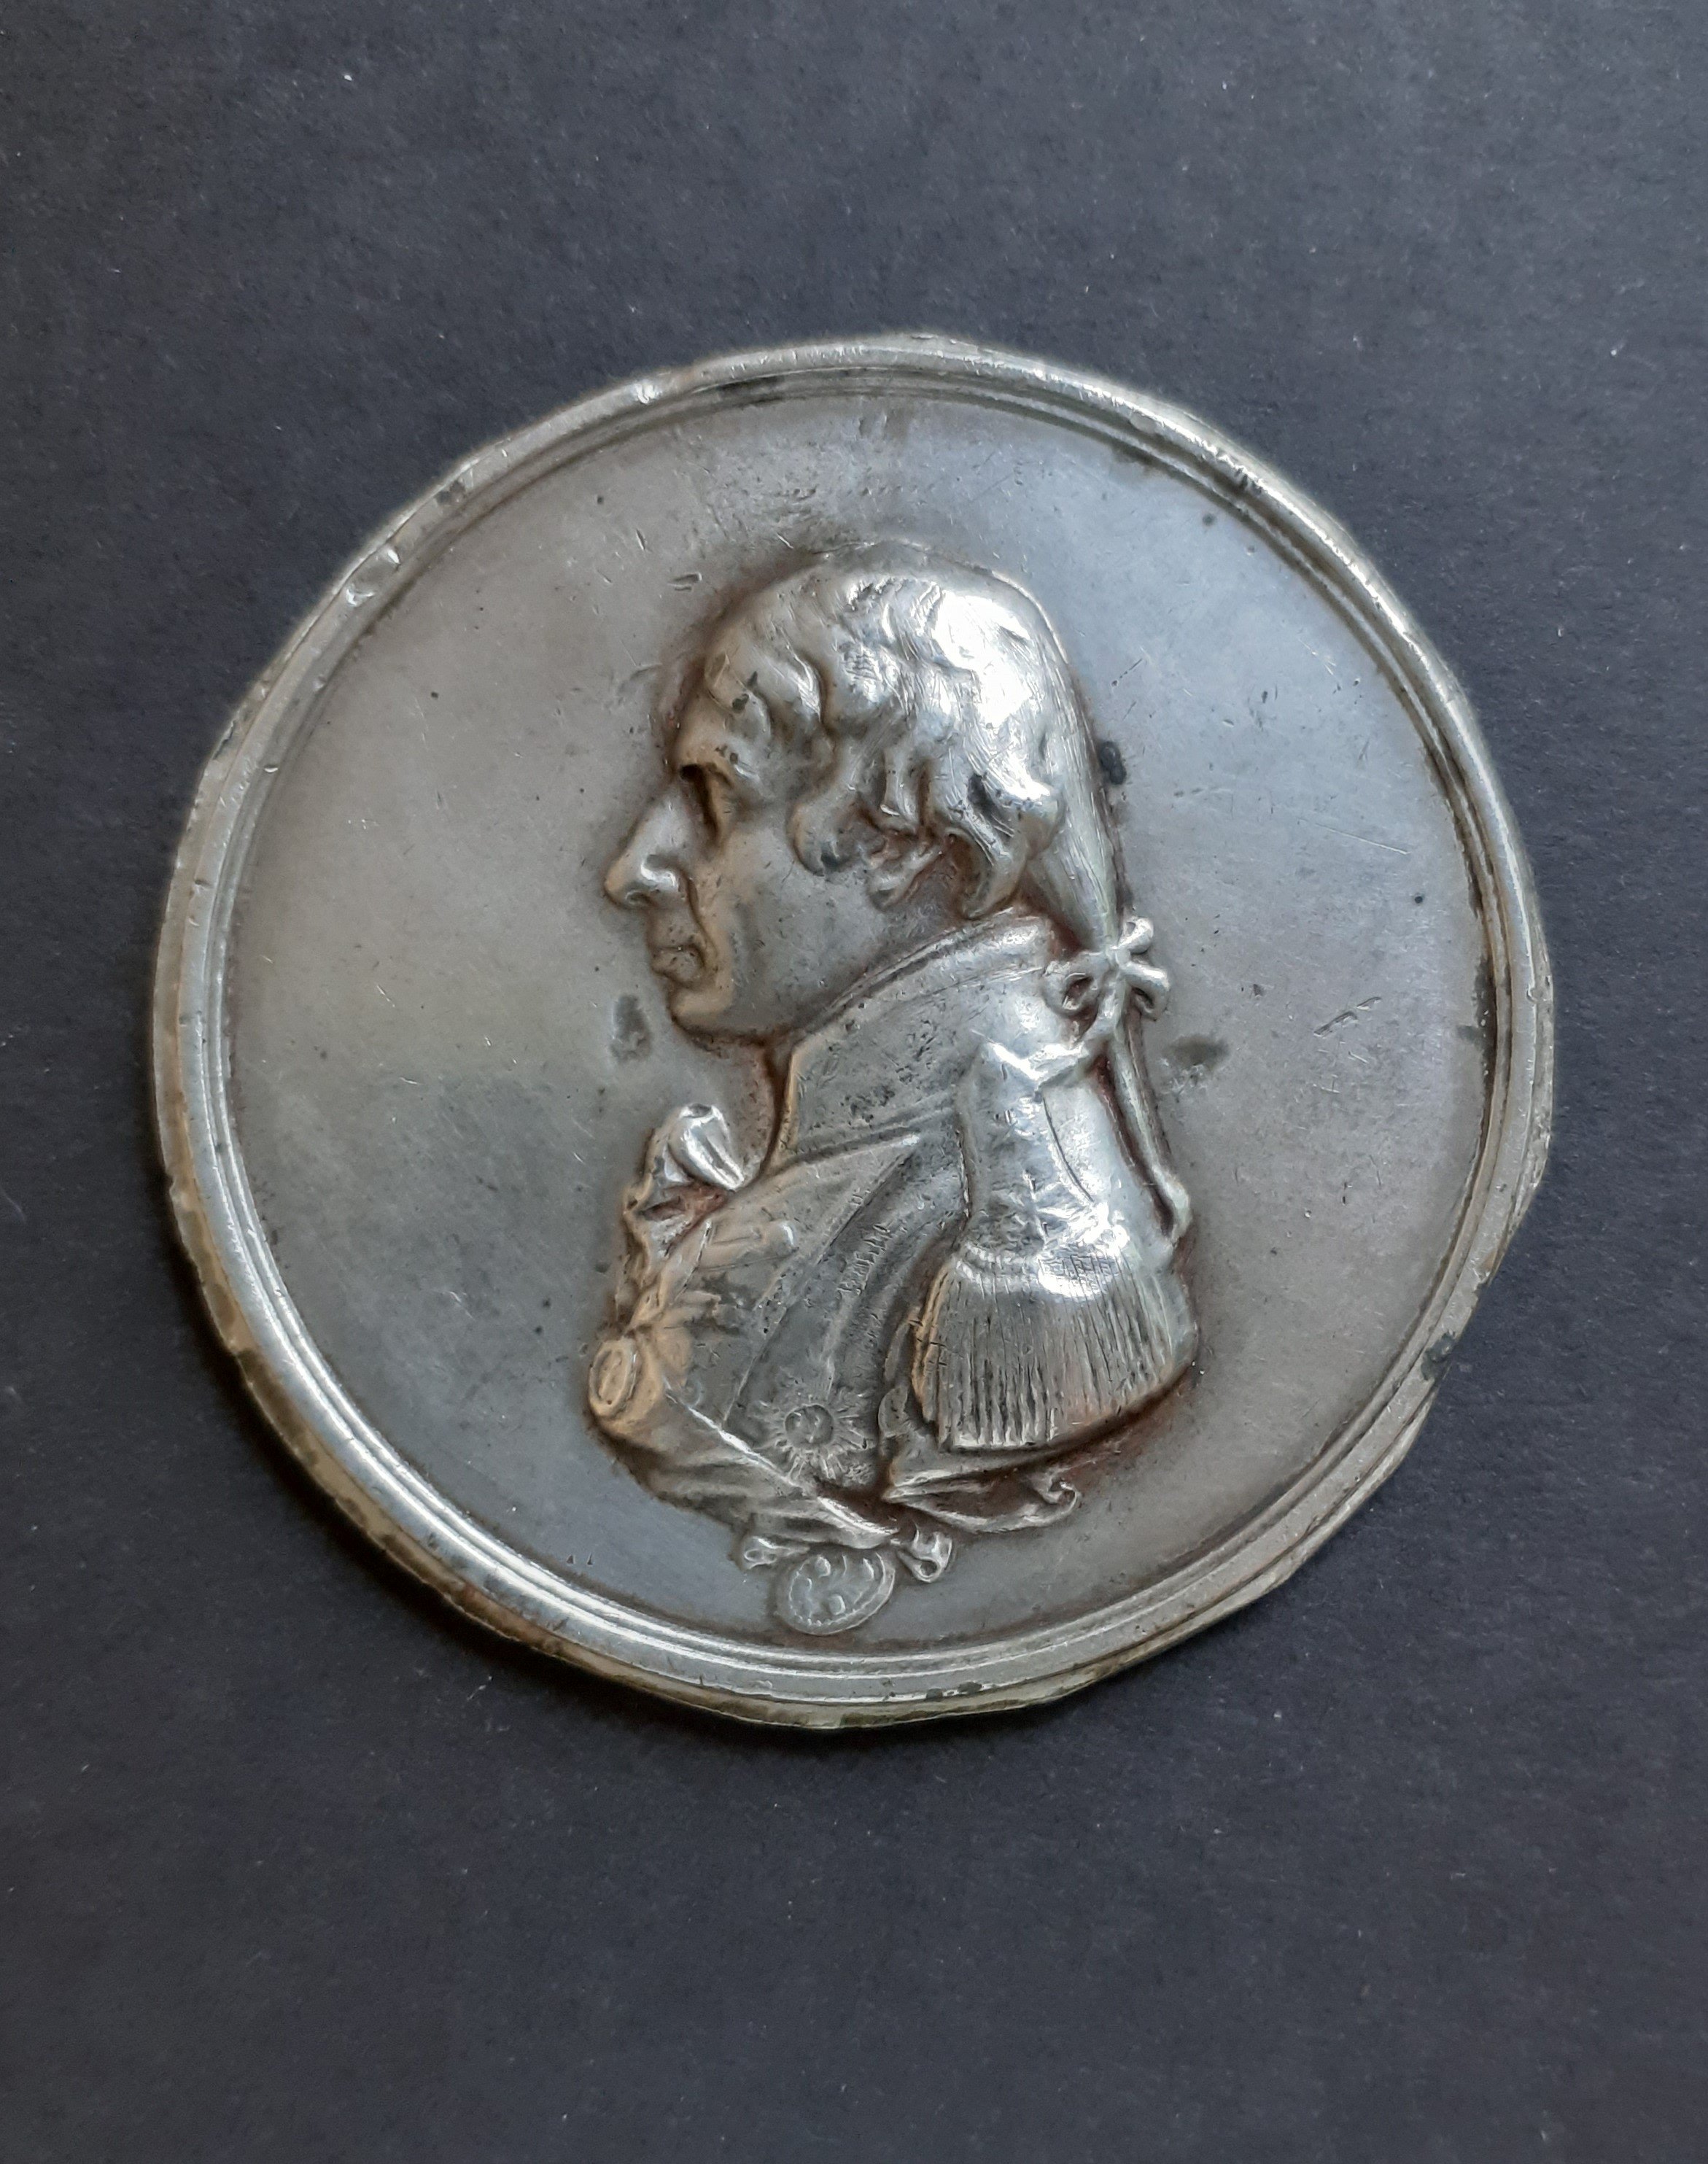 Vice-Admiral Horatio Nelson Medallion.